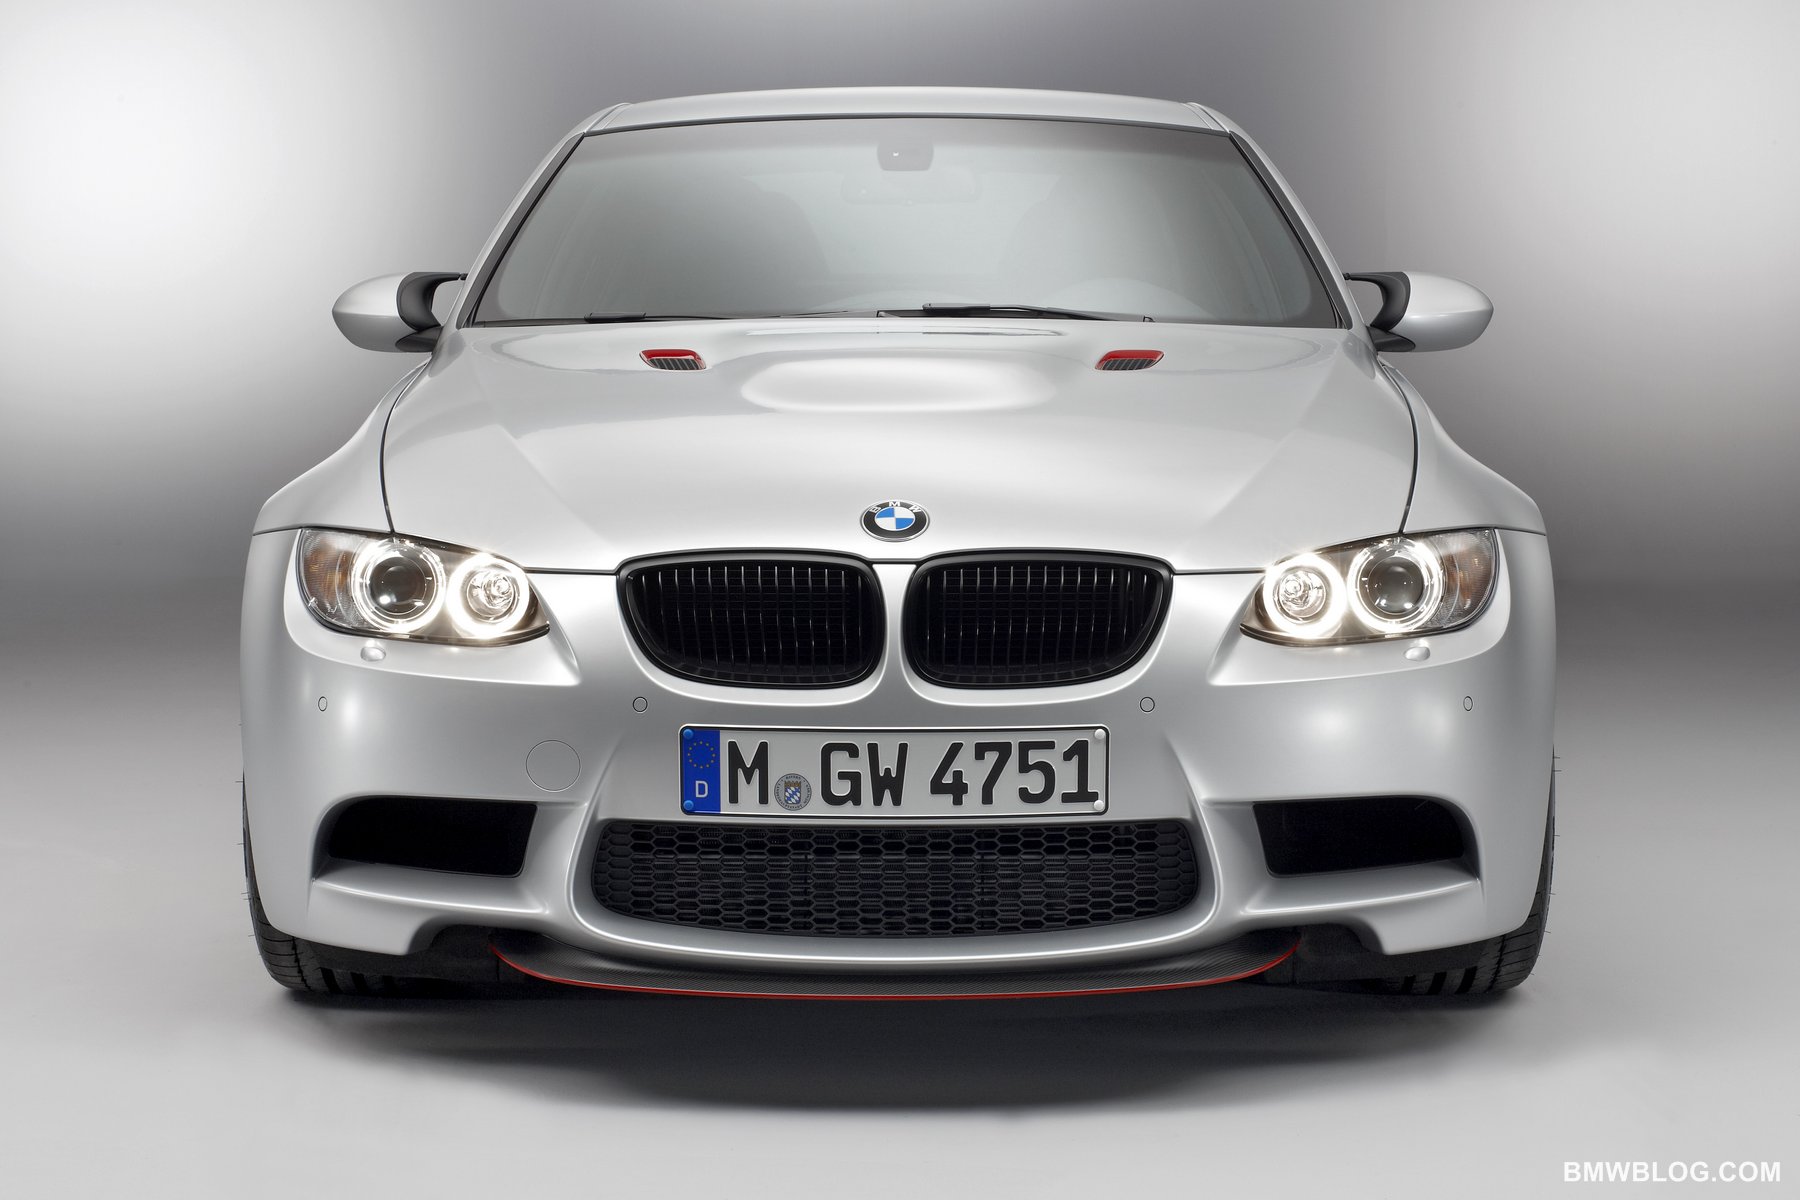 Bmw m3 power to weight ratio